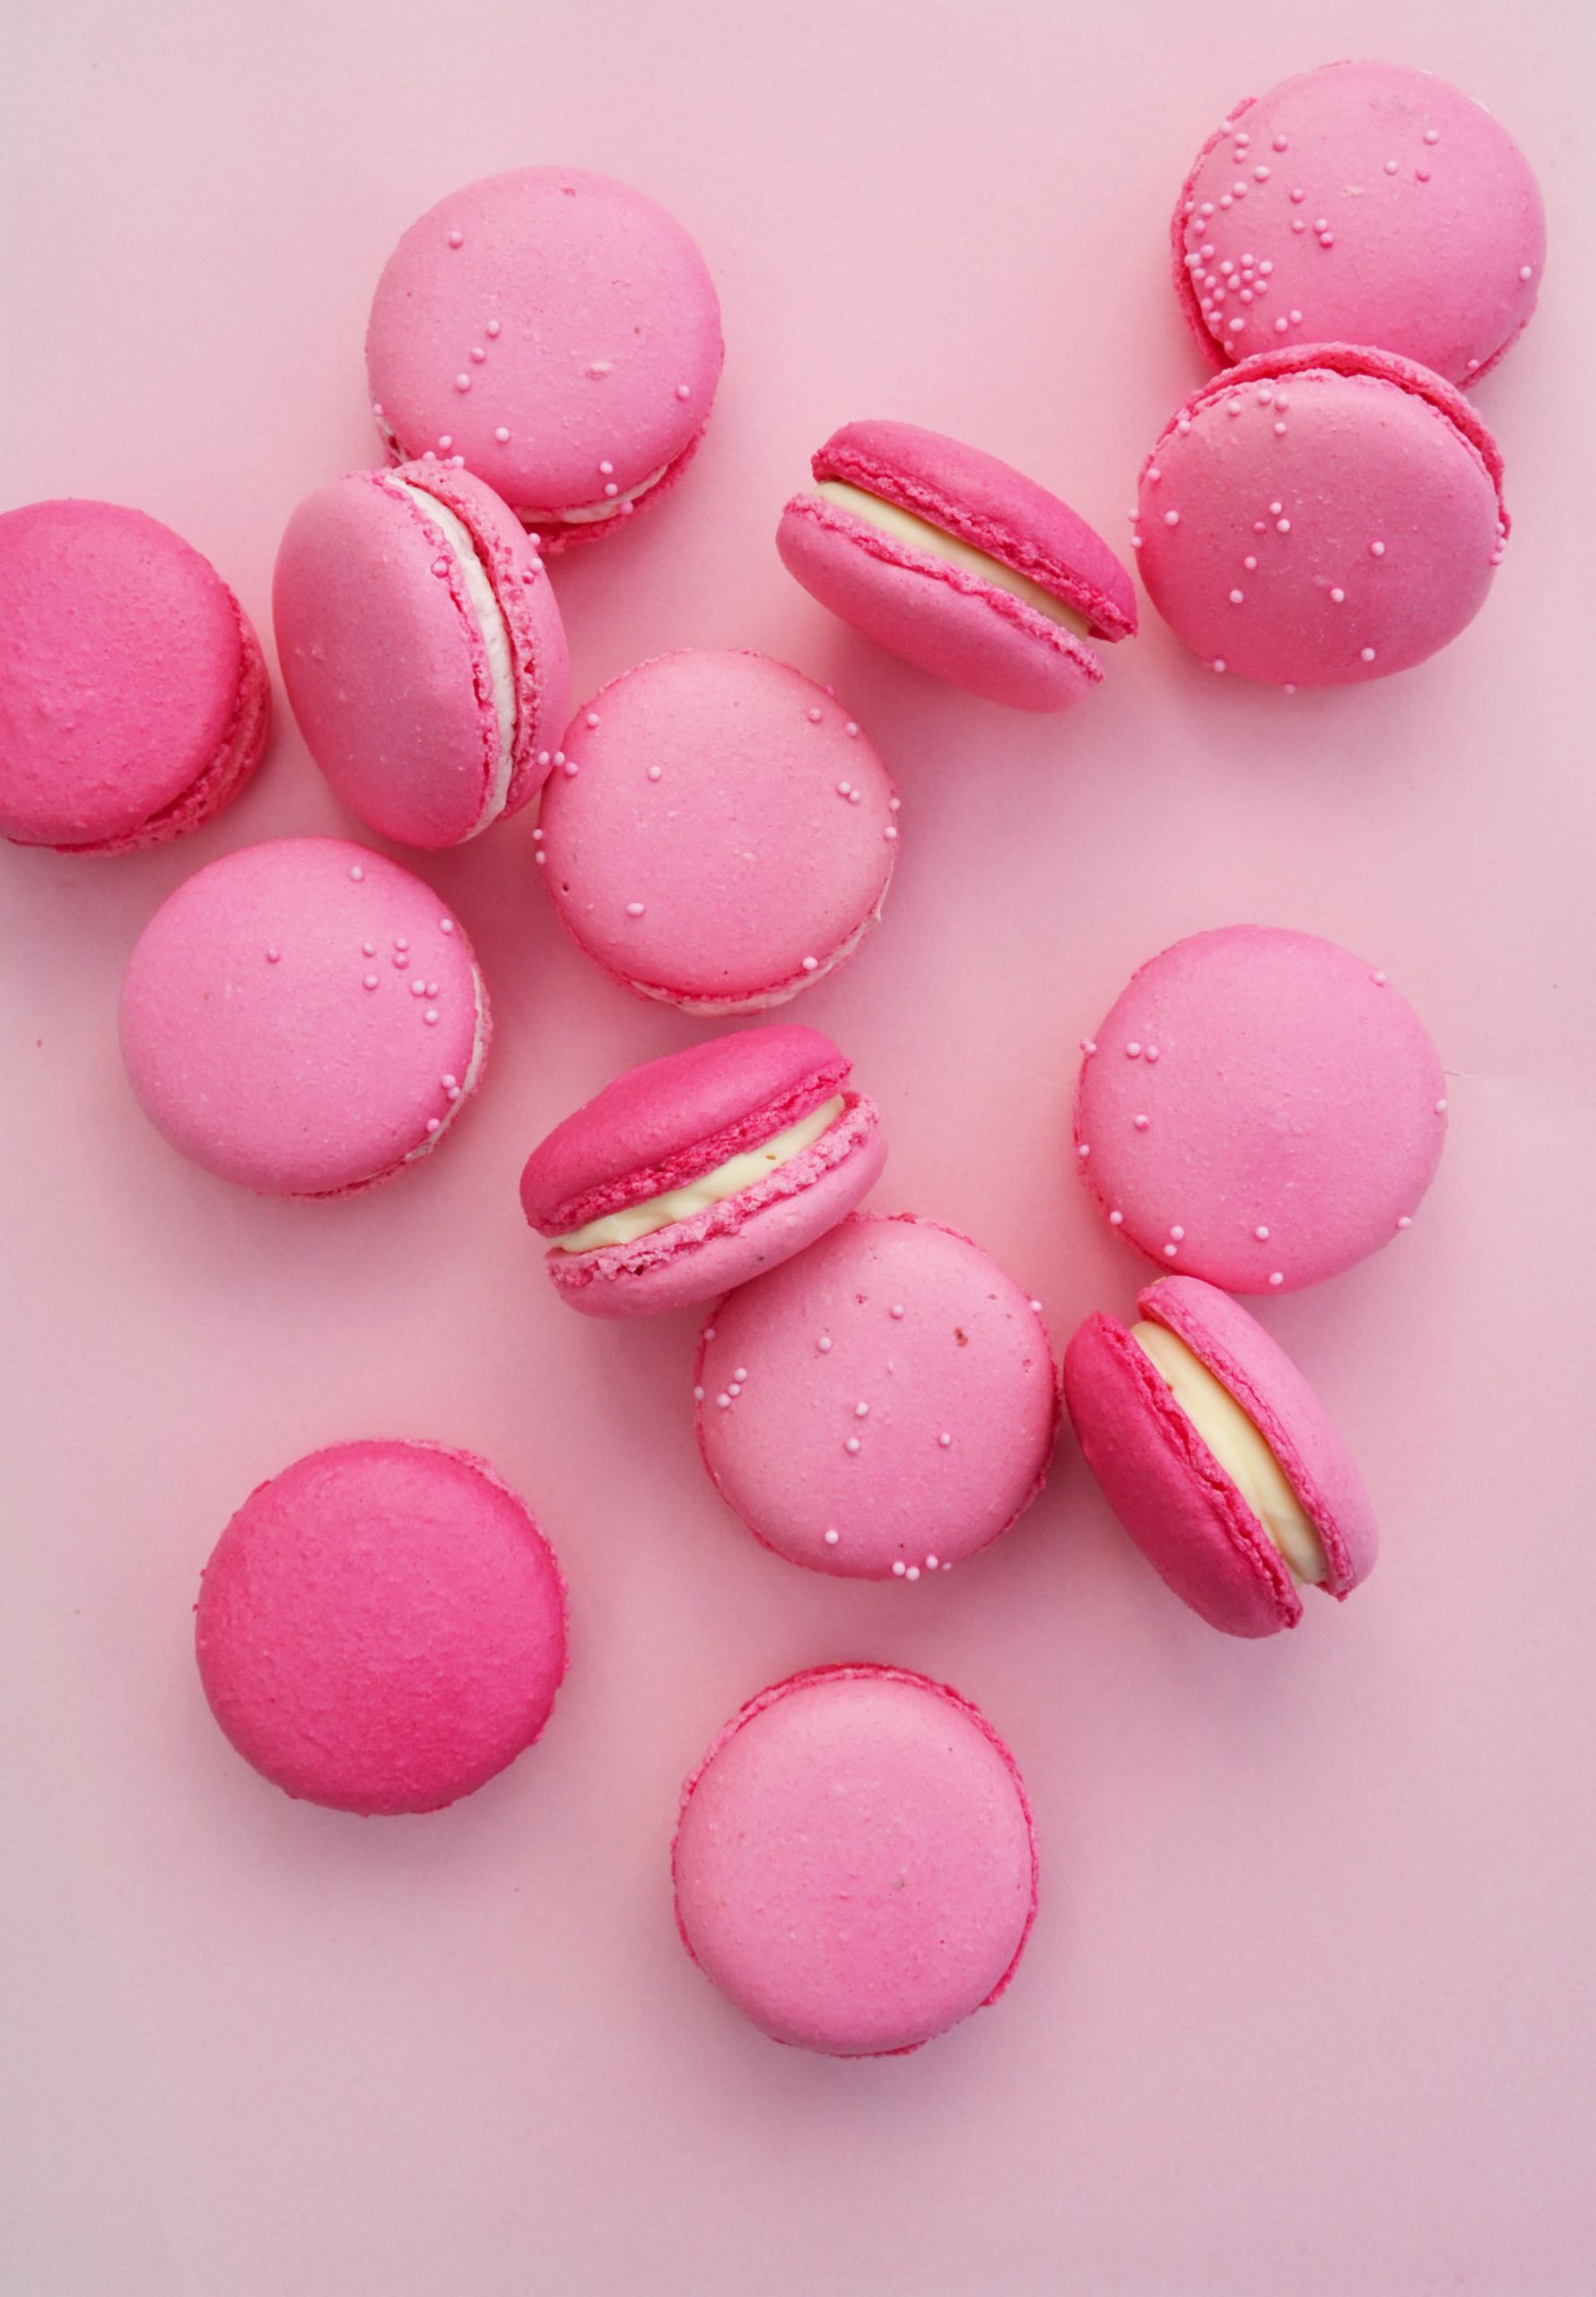 Bite the Macaron turns Its Macarons Pink for Breast Cancer Awareness!